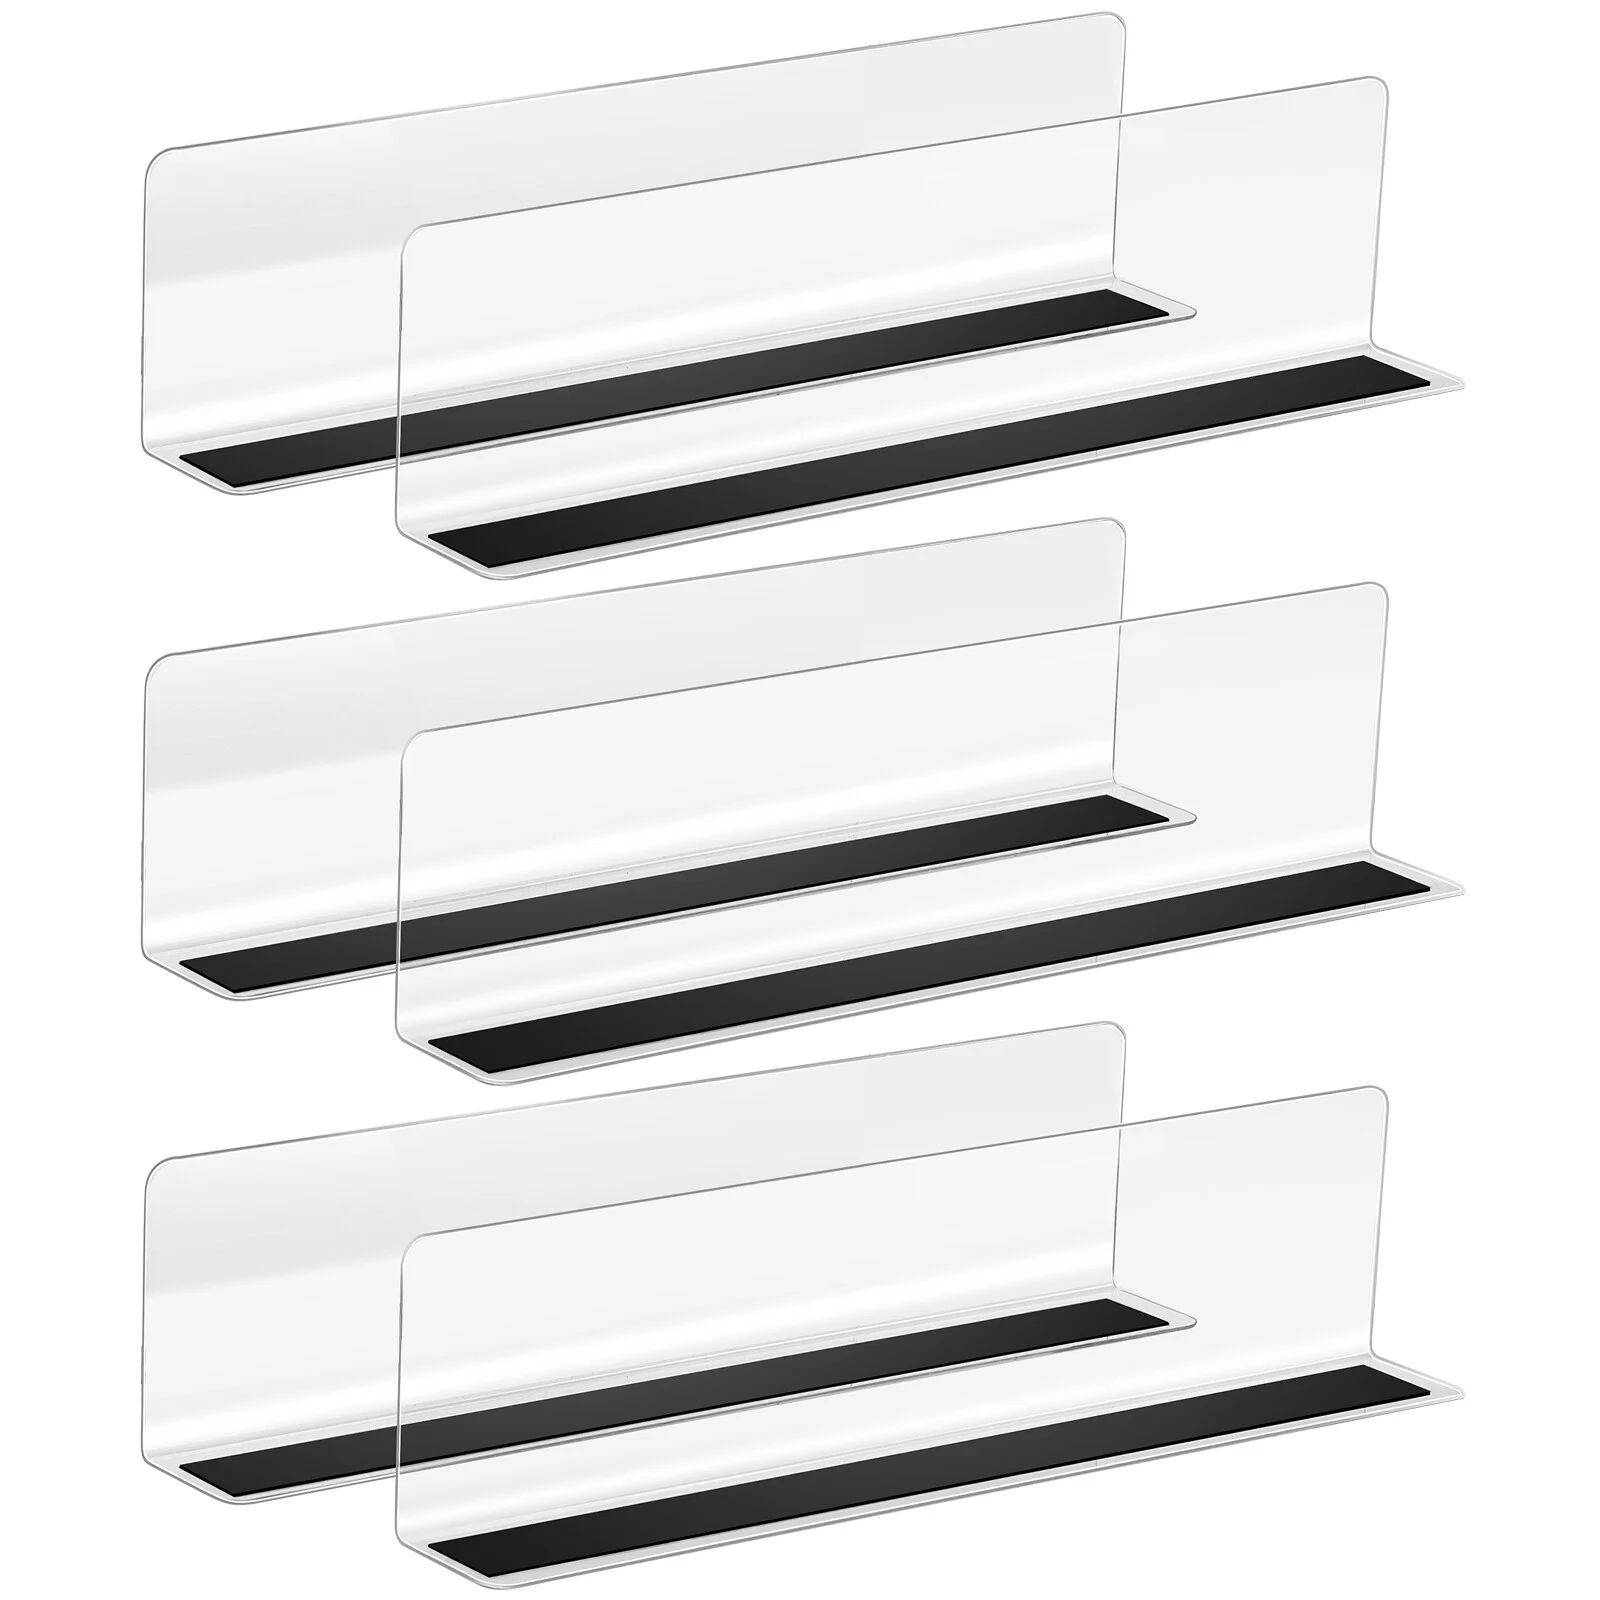 

6 Pcs Commodity Divider Classification Baffle Shelf Dividers Stores Clear Acrylic Plastic Magnet Pvc Goods Boards Purse